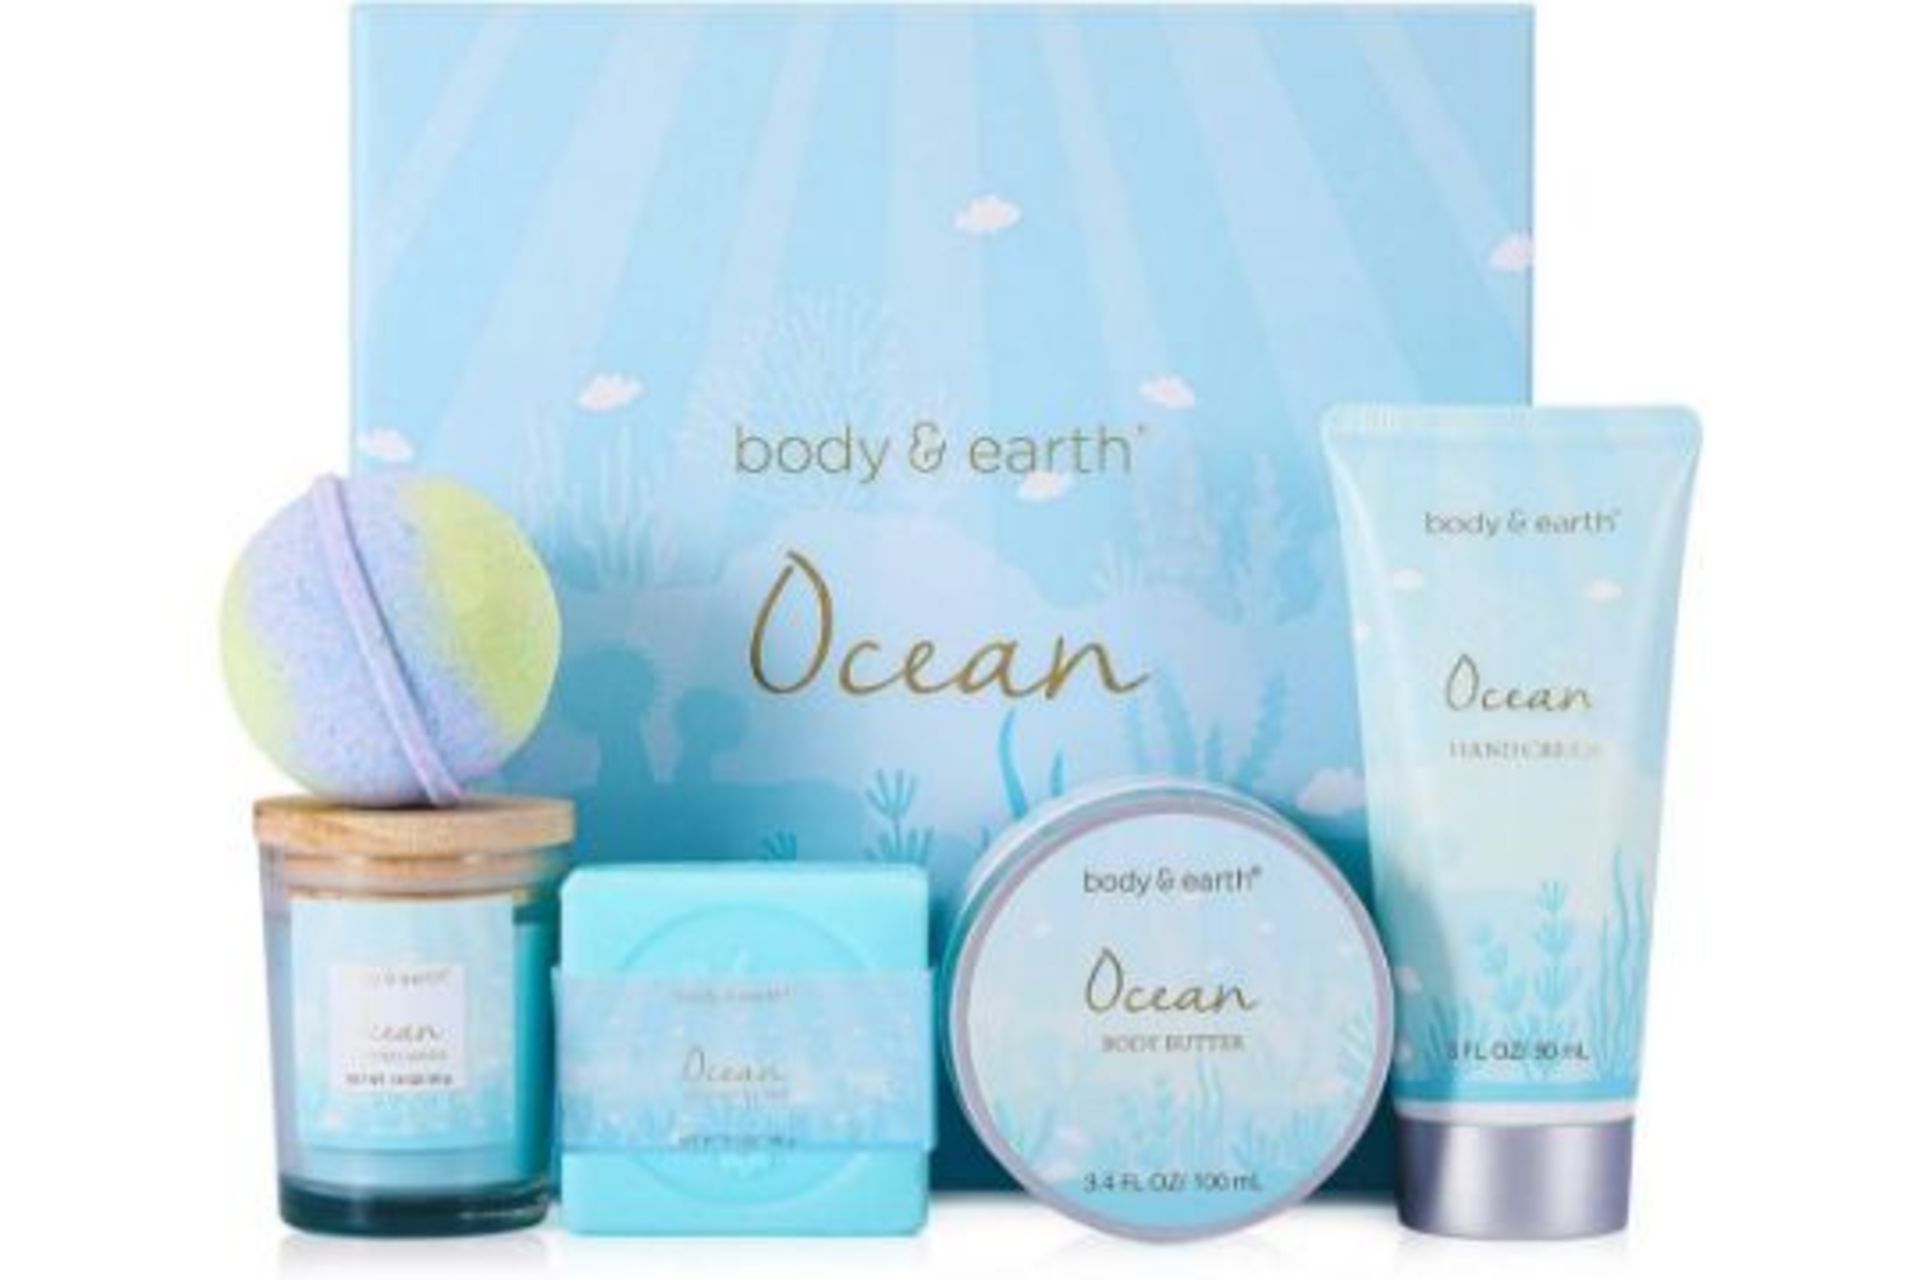 PALLET TO CONTAIN 80 x NEW BOXED BODY & EARTH OCEAN 5 PIECE GIFT SETS. EACH SET INCLUDES: BATH BOMB,